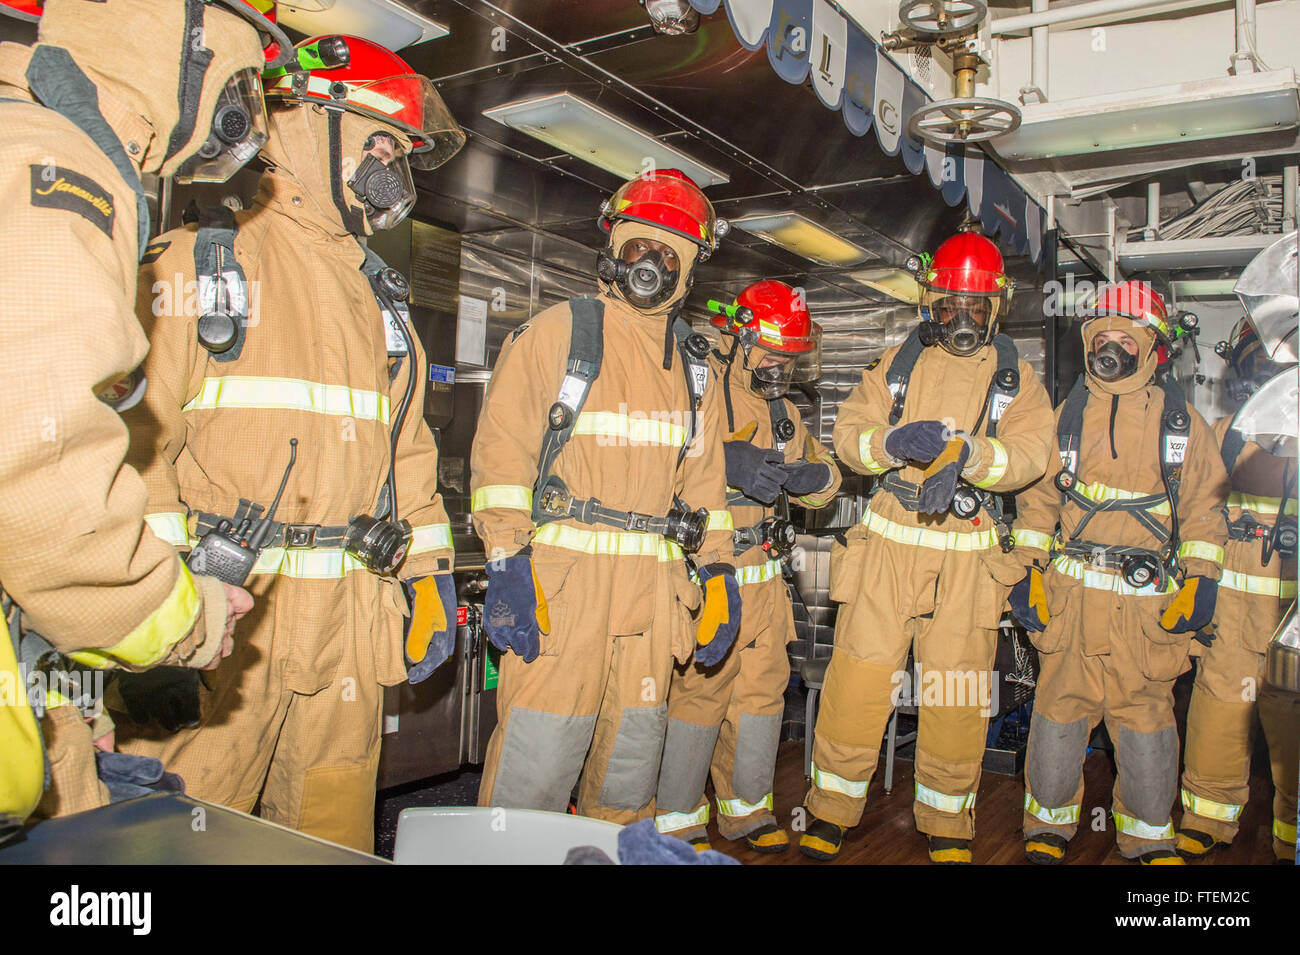 ATLANTIC OCEAN (Feb. 19, 2015) USS Laboon (DDG 58) Sailors prepare to take part in a fire drill aboard ship Feb. 19, 2015. Laboon, an Arleigh Burke-class guided-missile destroyer home ported in Norfolk, is underway conducting naval operations in the U.S. 6th Fleet area of operations in support of U.S. national security interests in Europe. Stock Photo